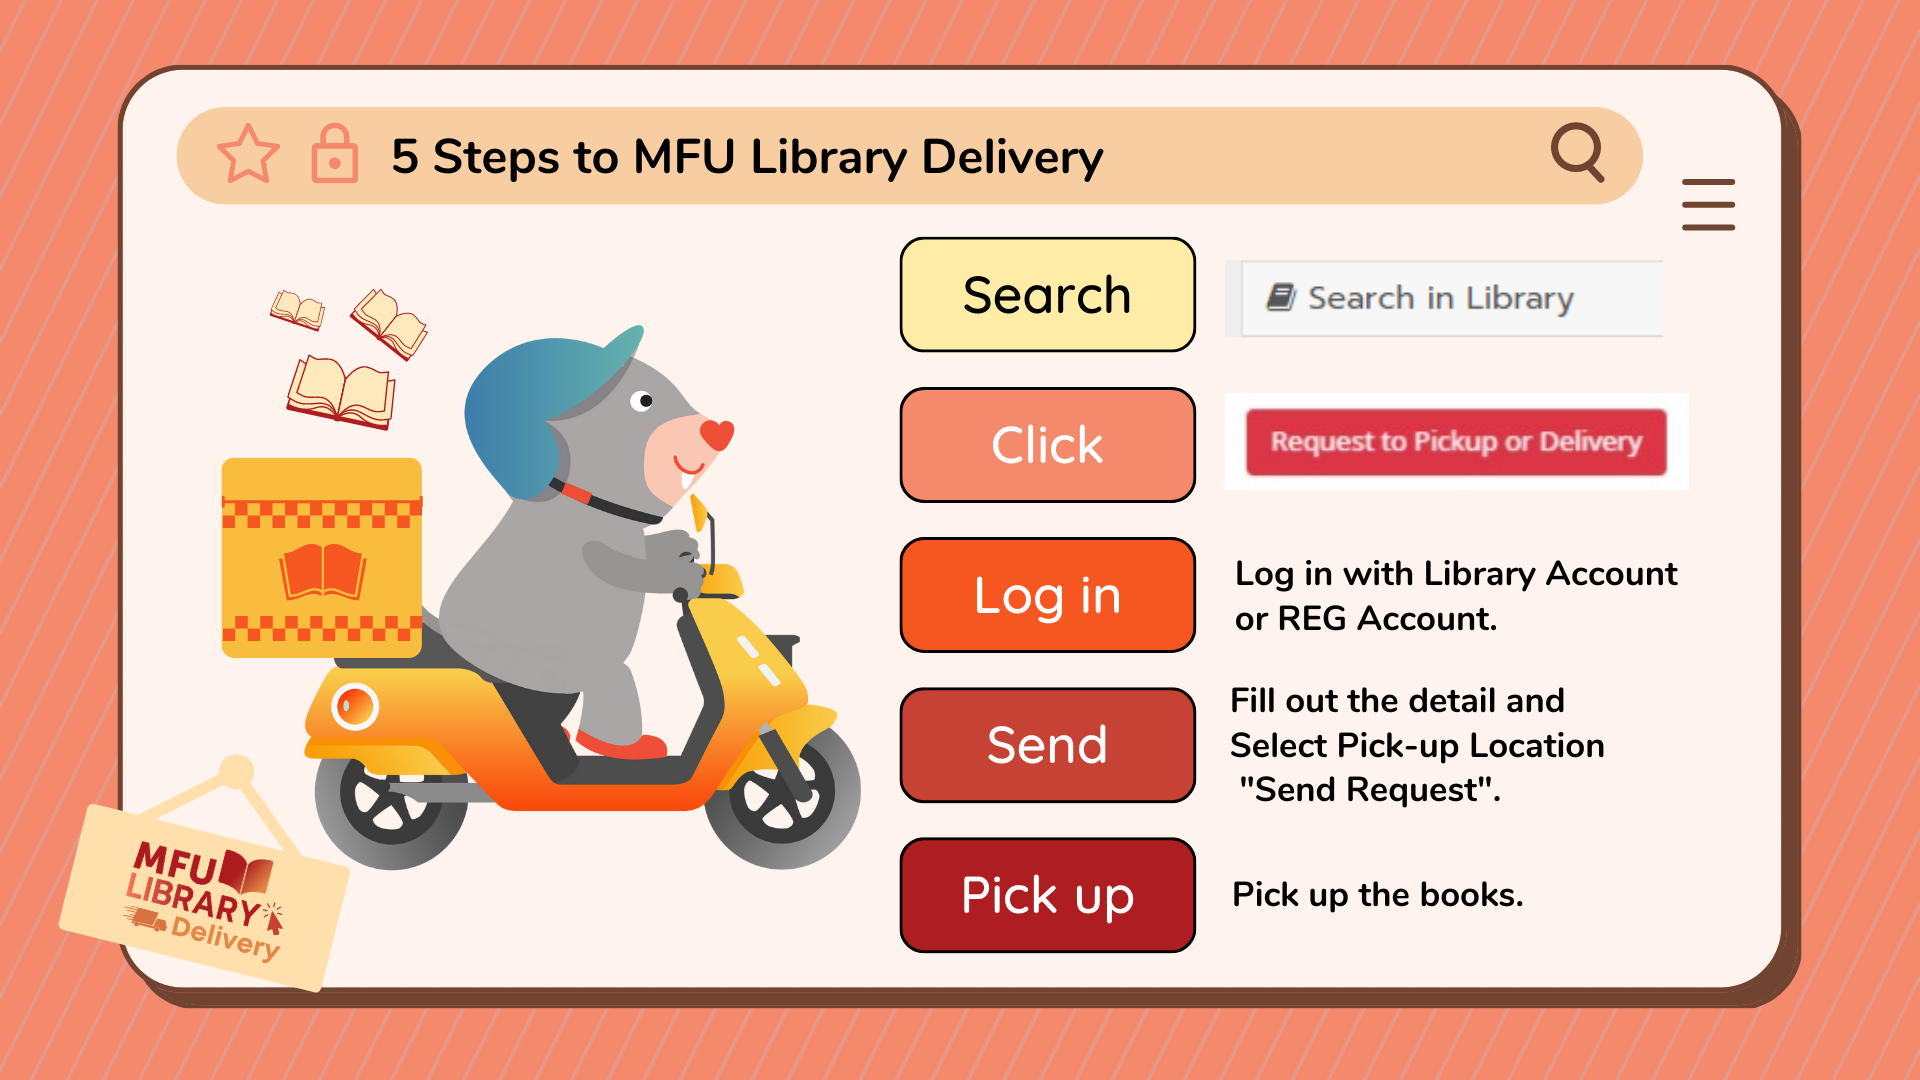 5 Steps to MFU Library Delivery (1)